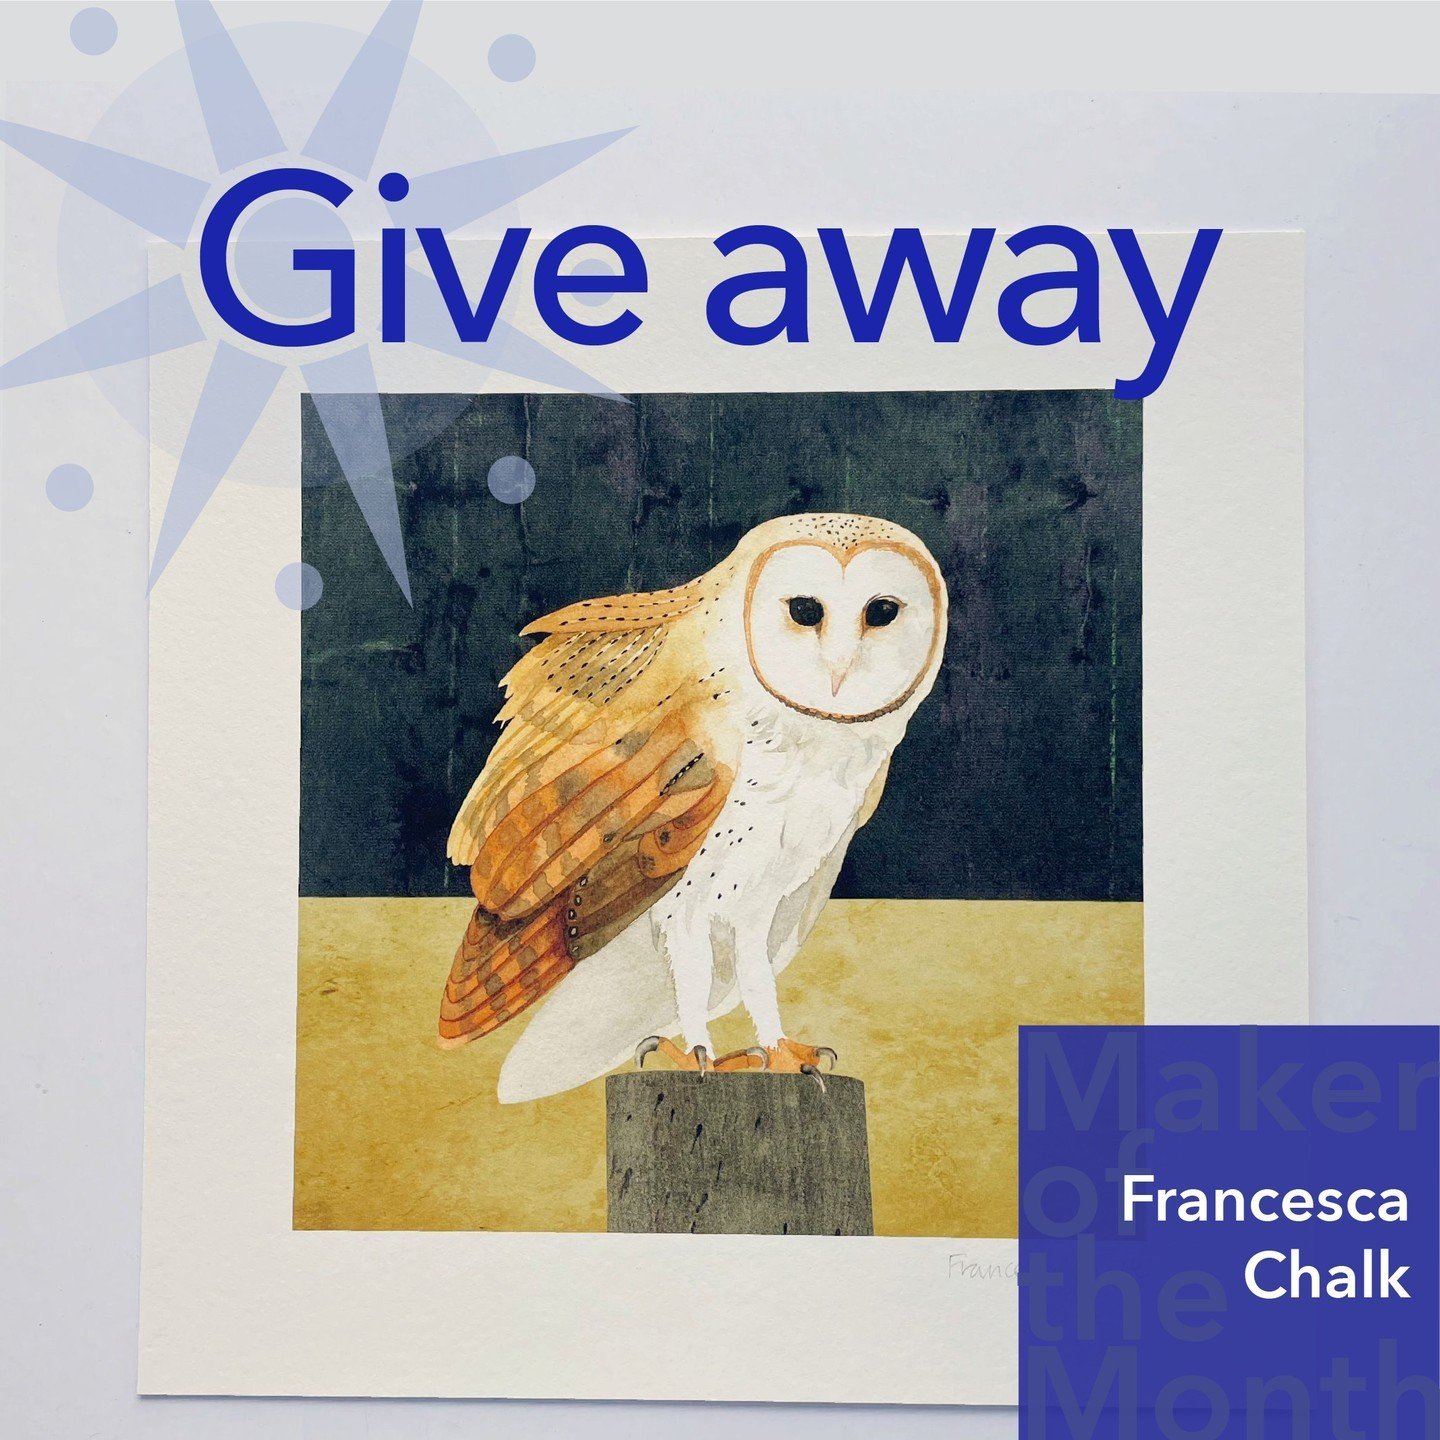 //GIVEAWAY//

This is our 4th giveaway as part of our Maker of the Month, featuring this beautiful print by Francesca Chalk!

Thank you Francesca for kindly donating this beautiful item!

Here's how to enter:

1 Follow @francescachalk 

2 Like this p